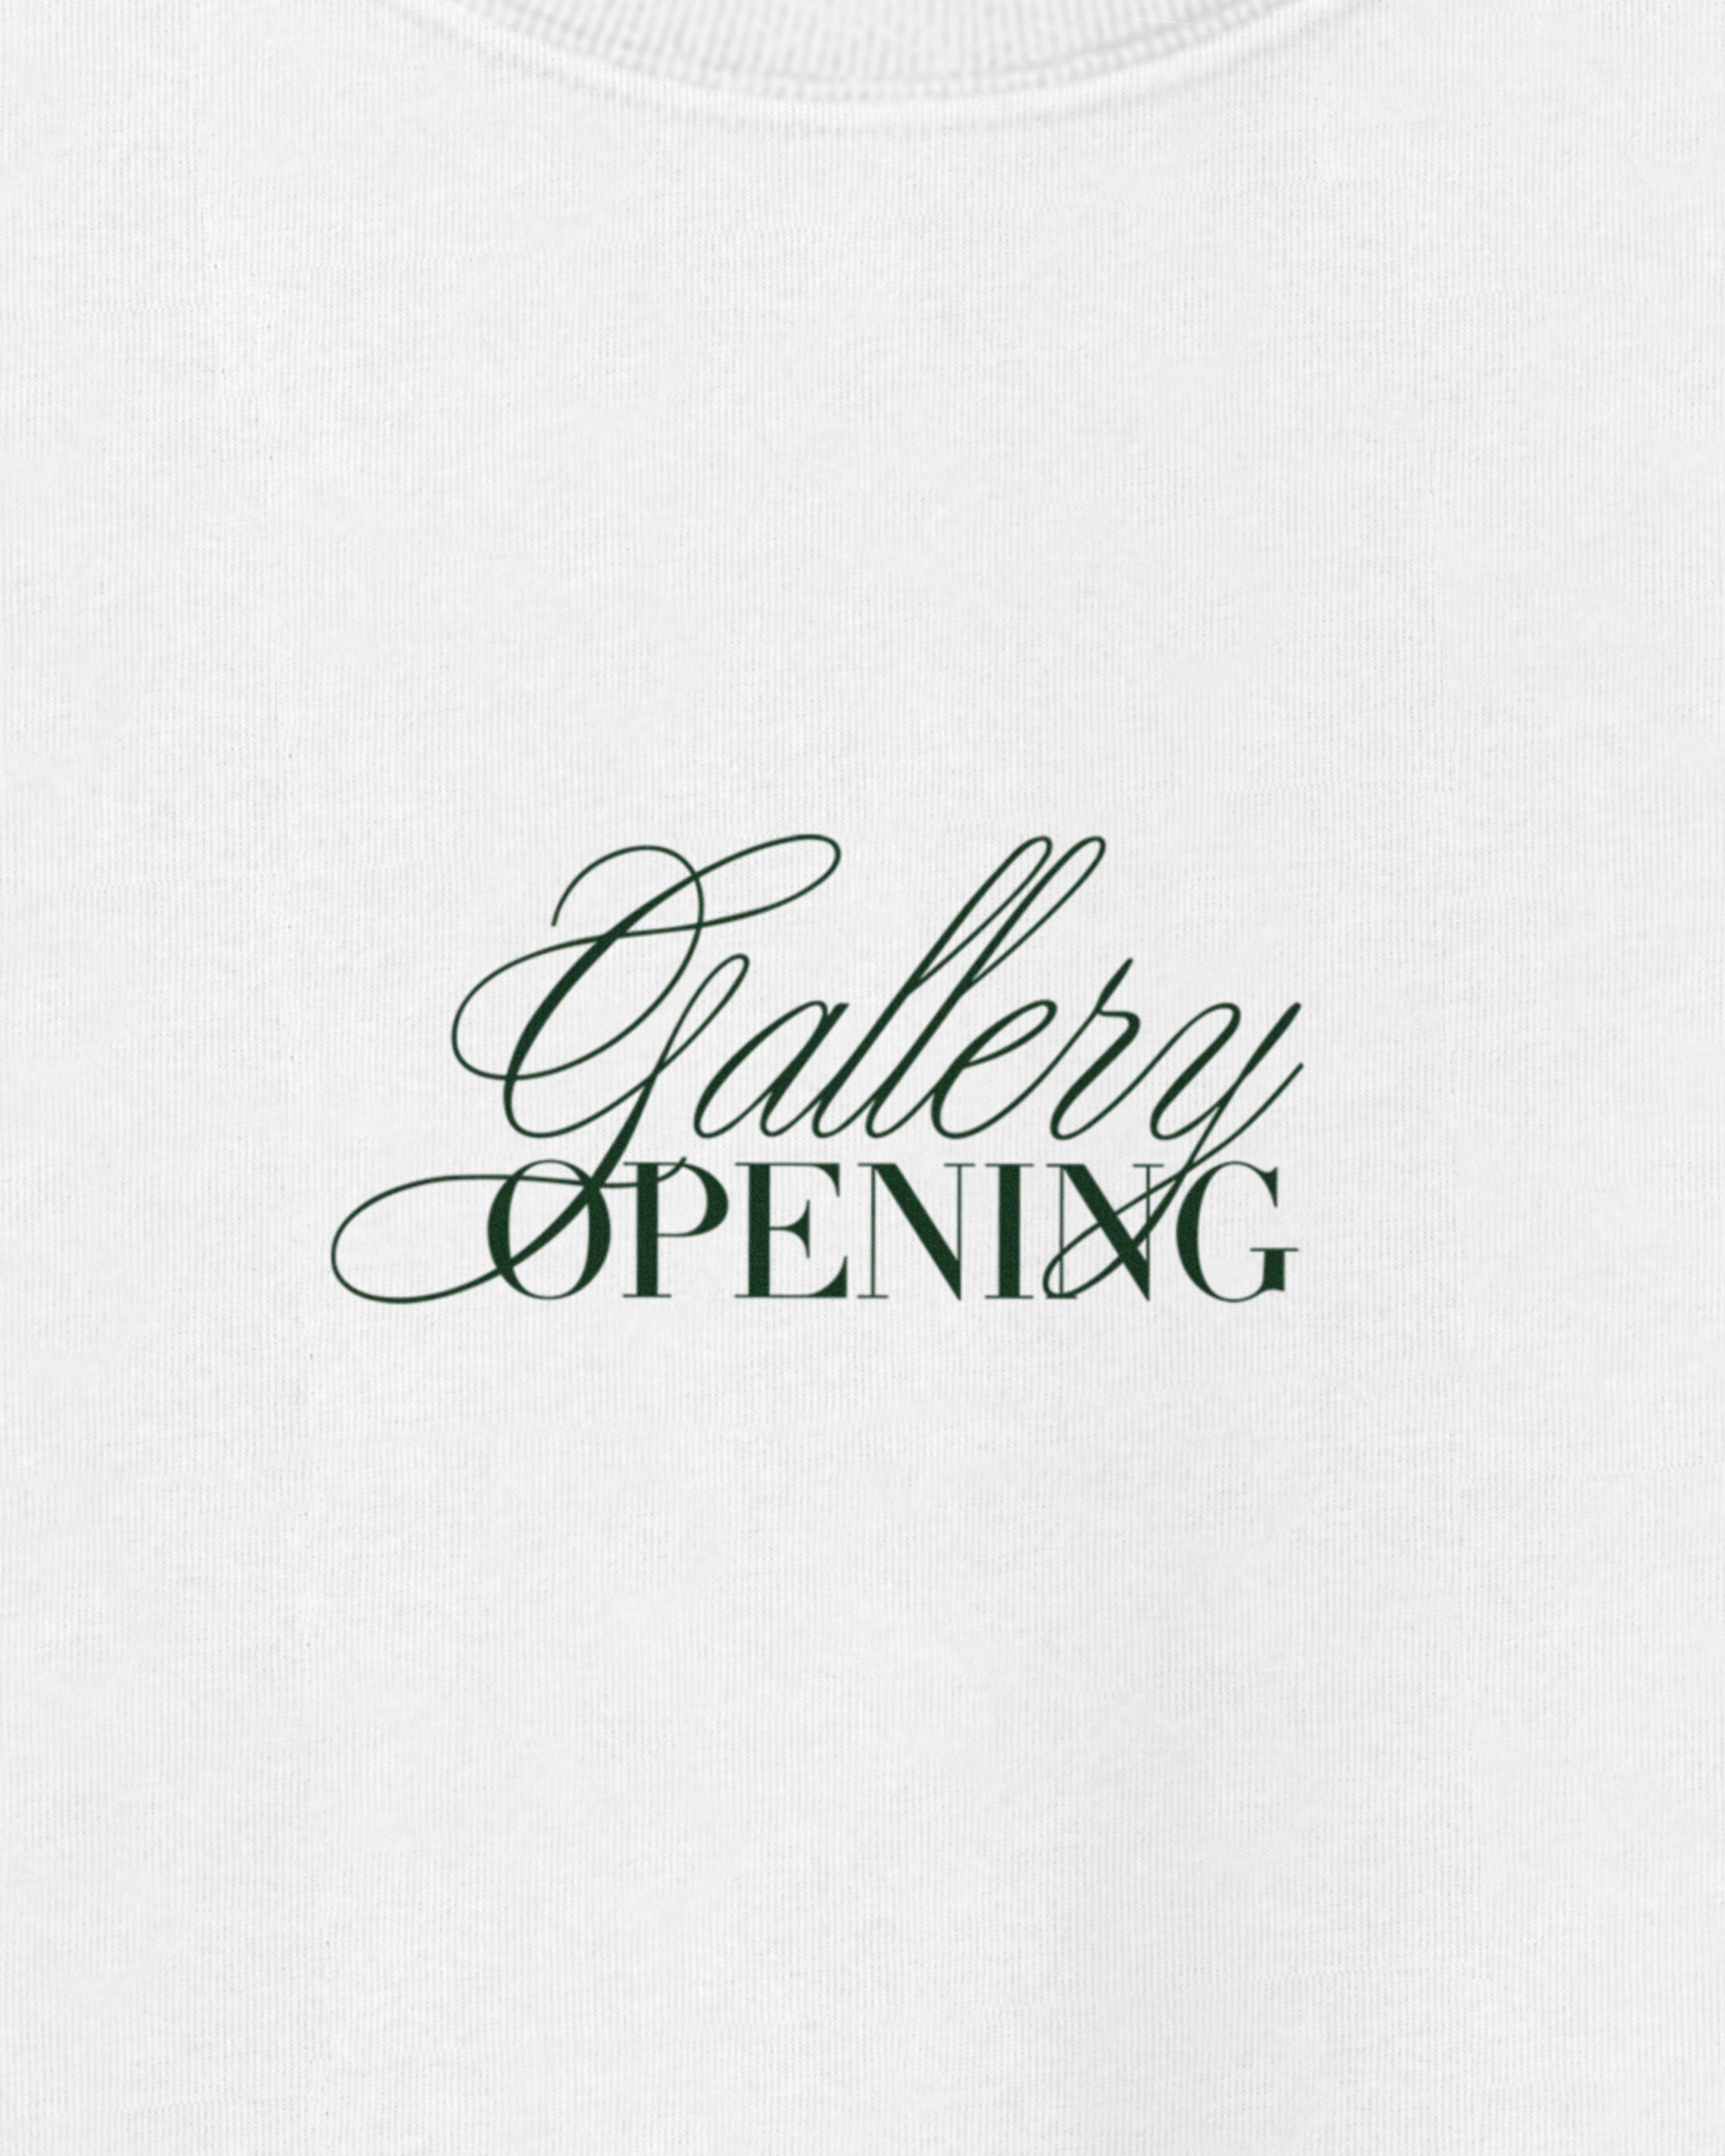 Gallery Opening Printed Green Script 100% Organic Cotton White Long Sleeve Tee.